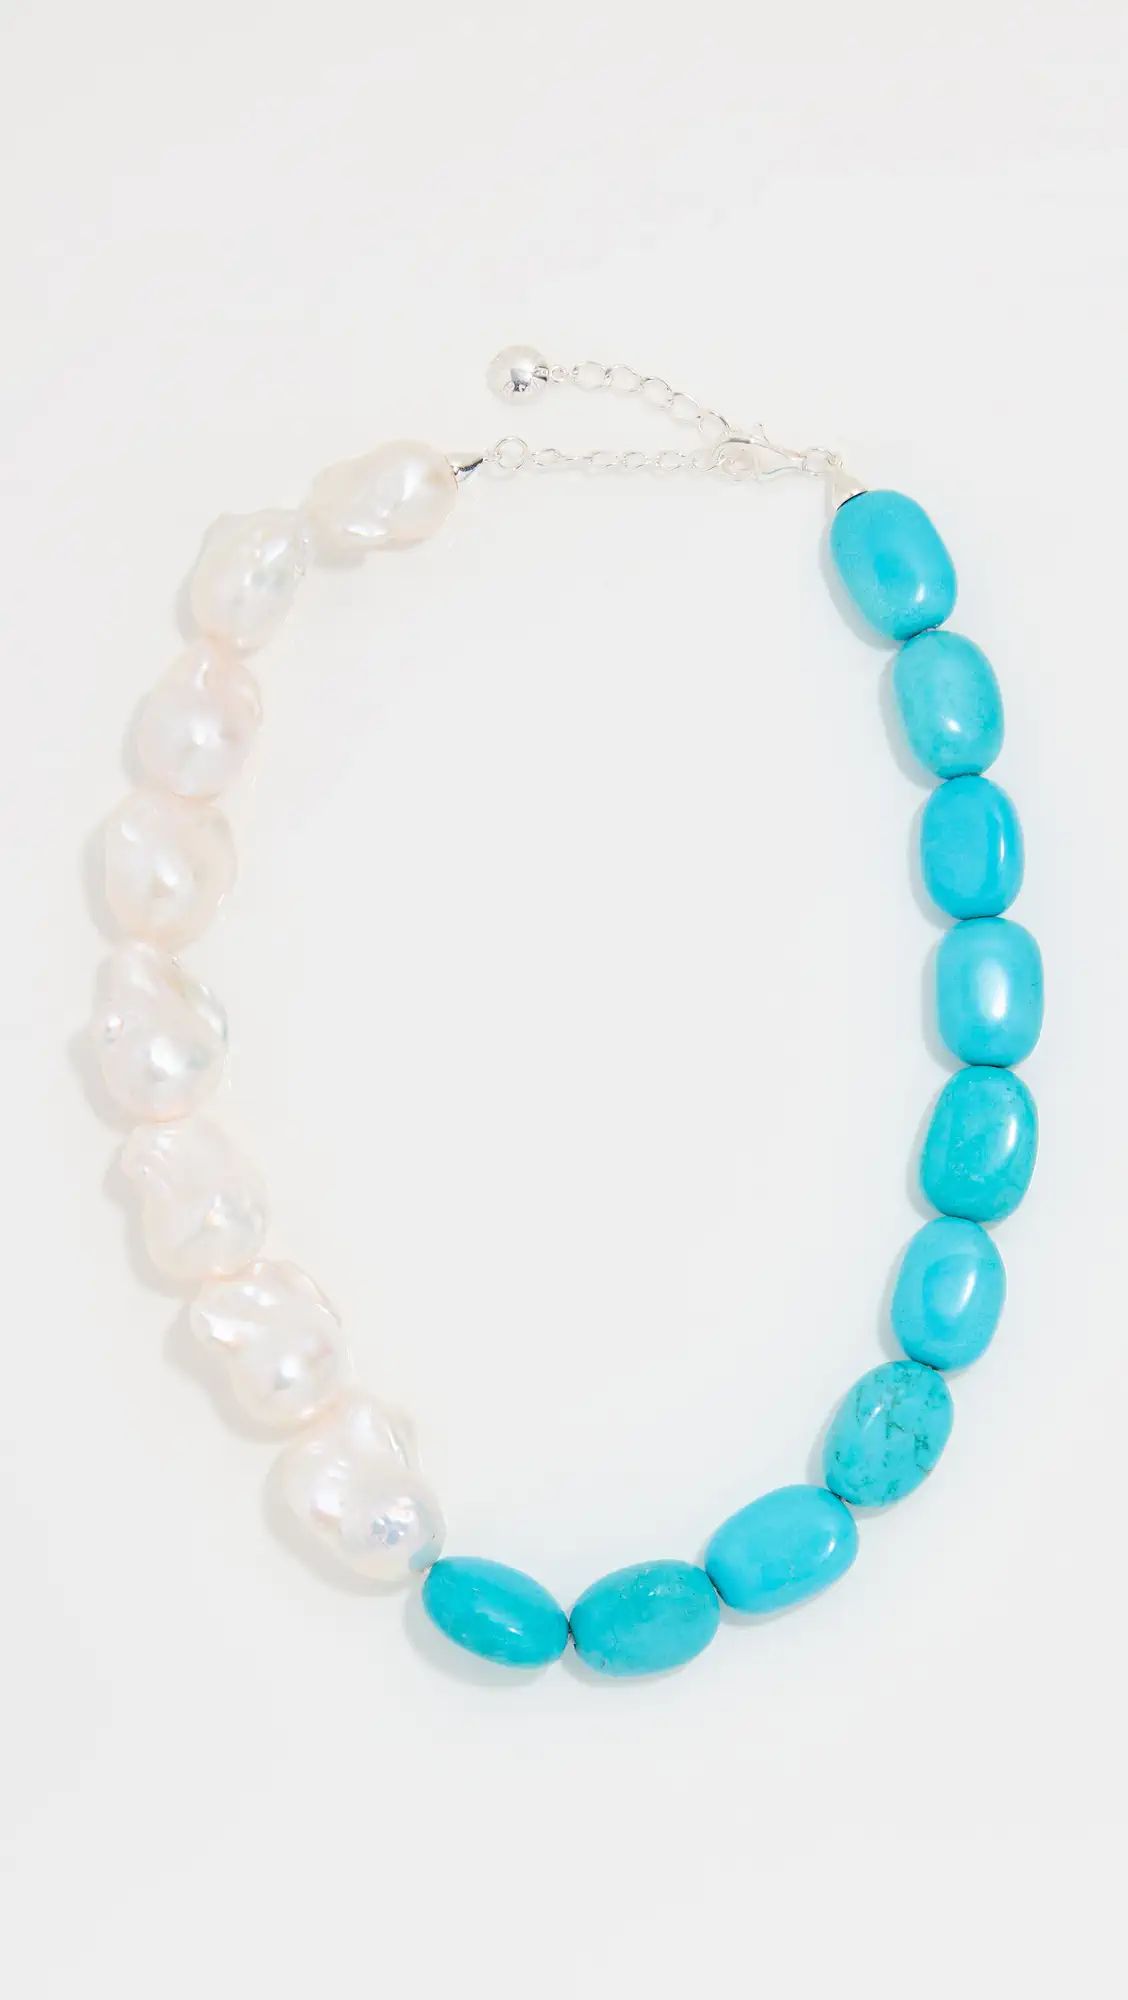 Turquoise Baroque Pearl Collar Necklace | Shopbop